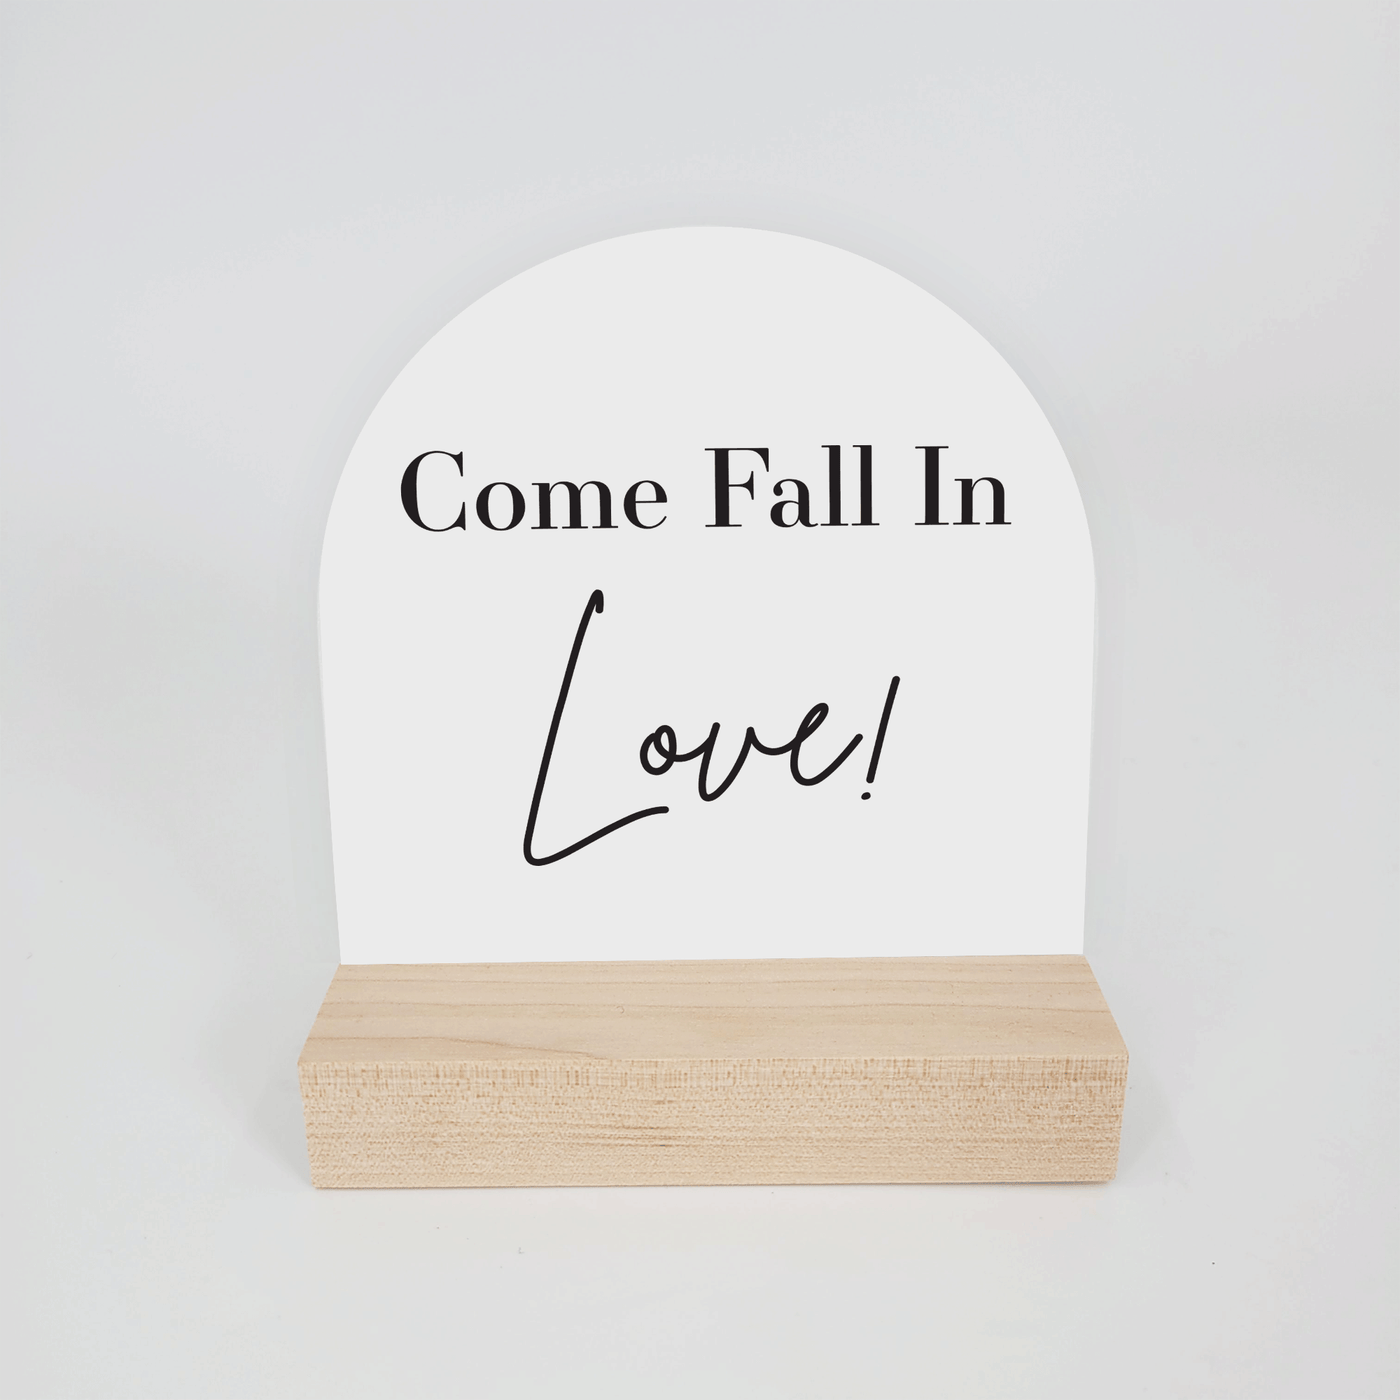 4x4 Arched Sign - Come Fall in LOVE!